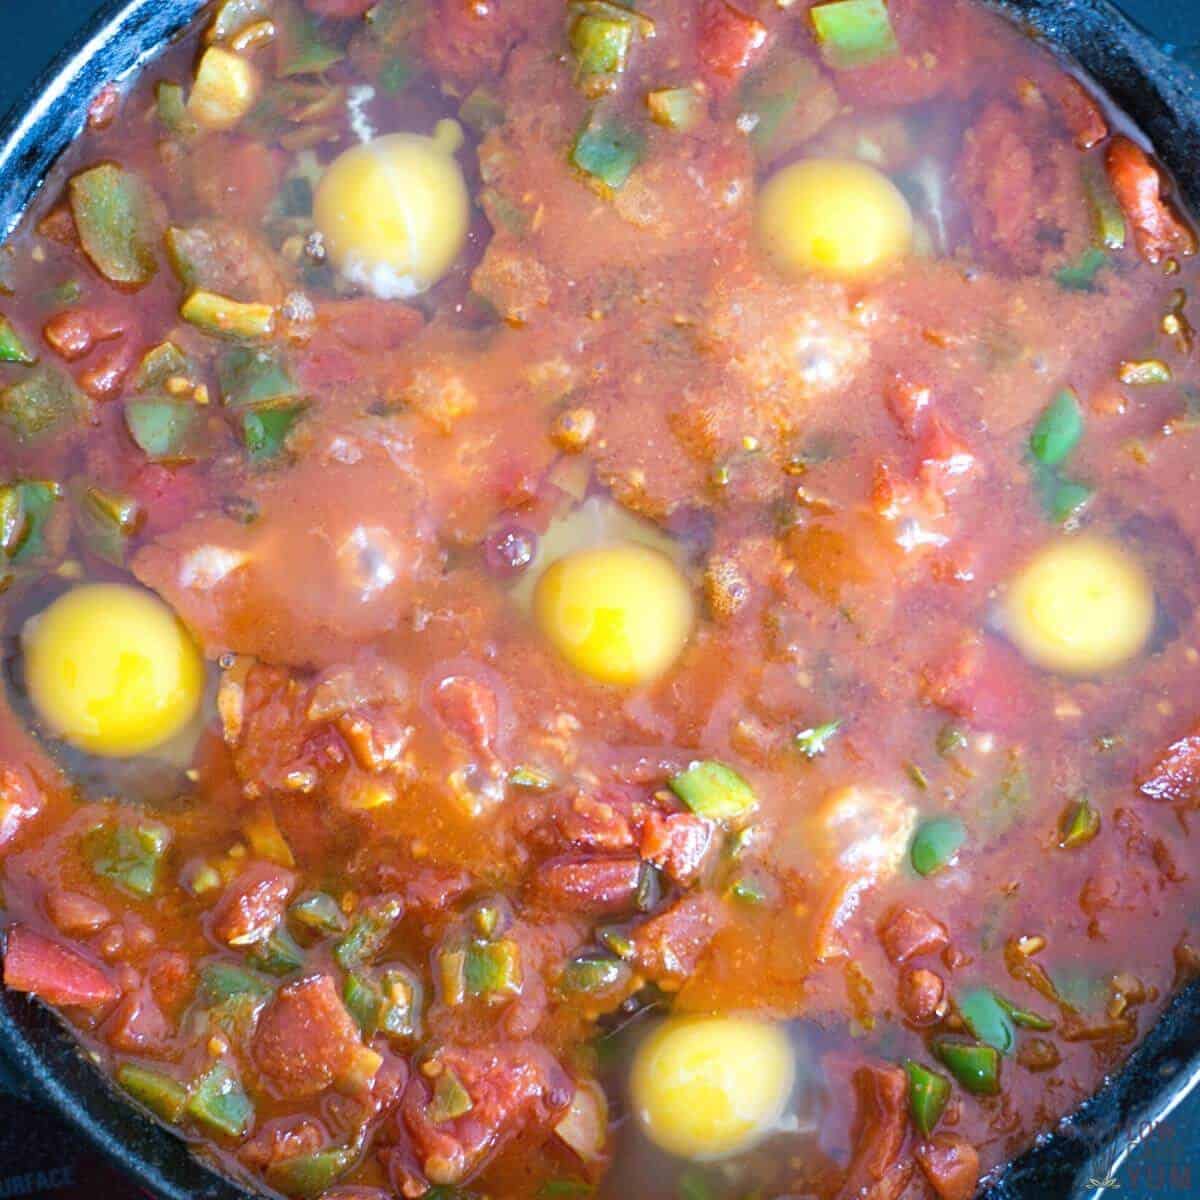 add eggs to sauce in skillet